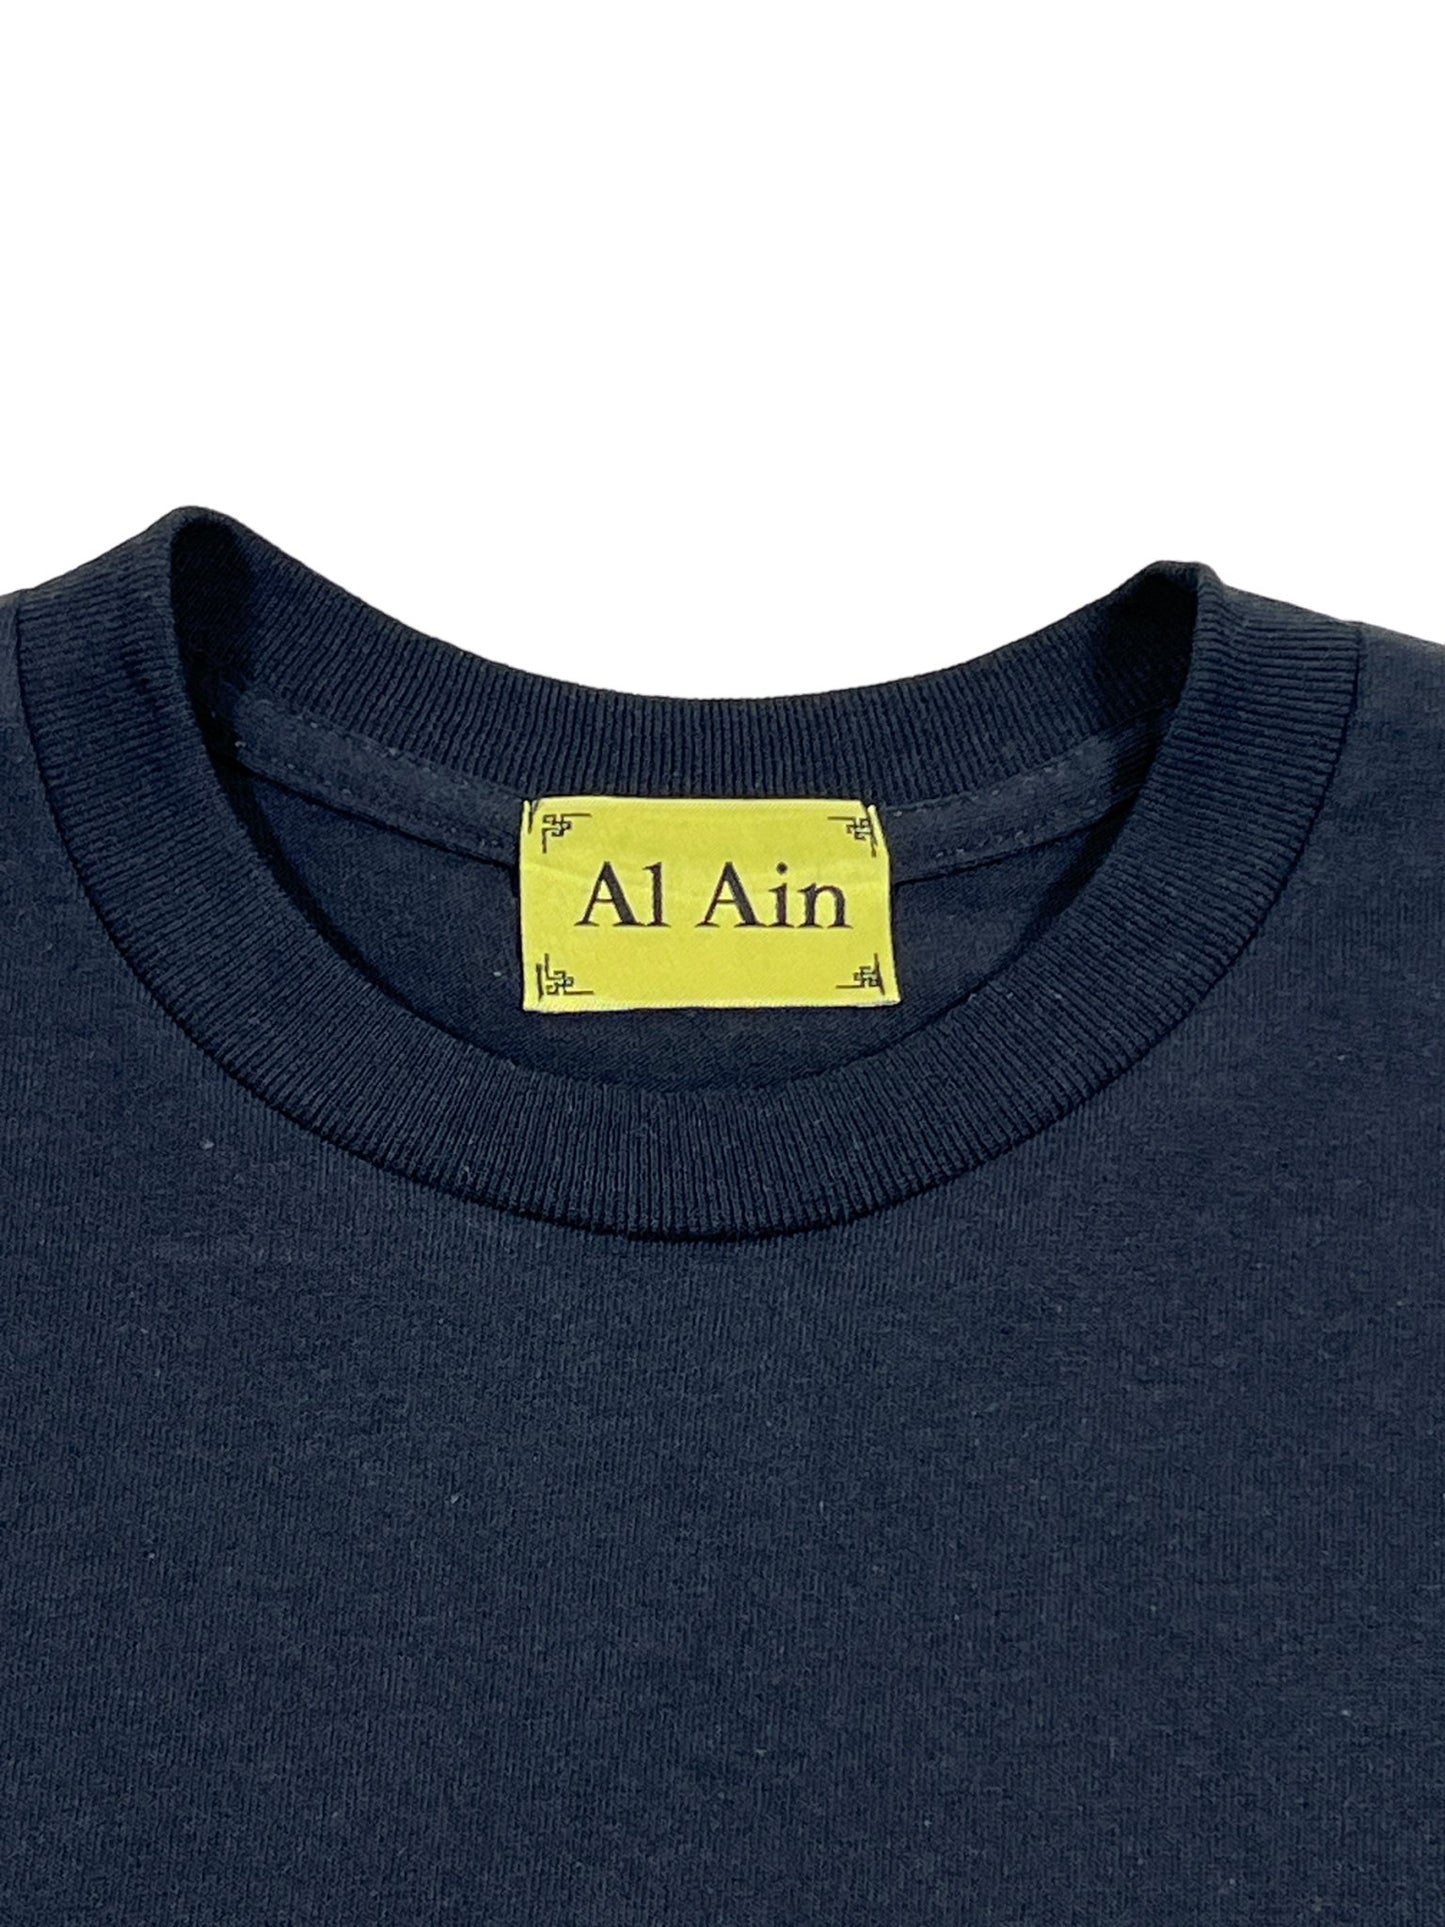 A stylish and eye-catching black T-shirt features a tag emblazoned with the text "AL AIN AMHX S124 CHILL NOIR." This graphic T-shirt effortlessly combines comfort and flair, making it a must-have addition to your wardrobe.